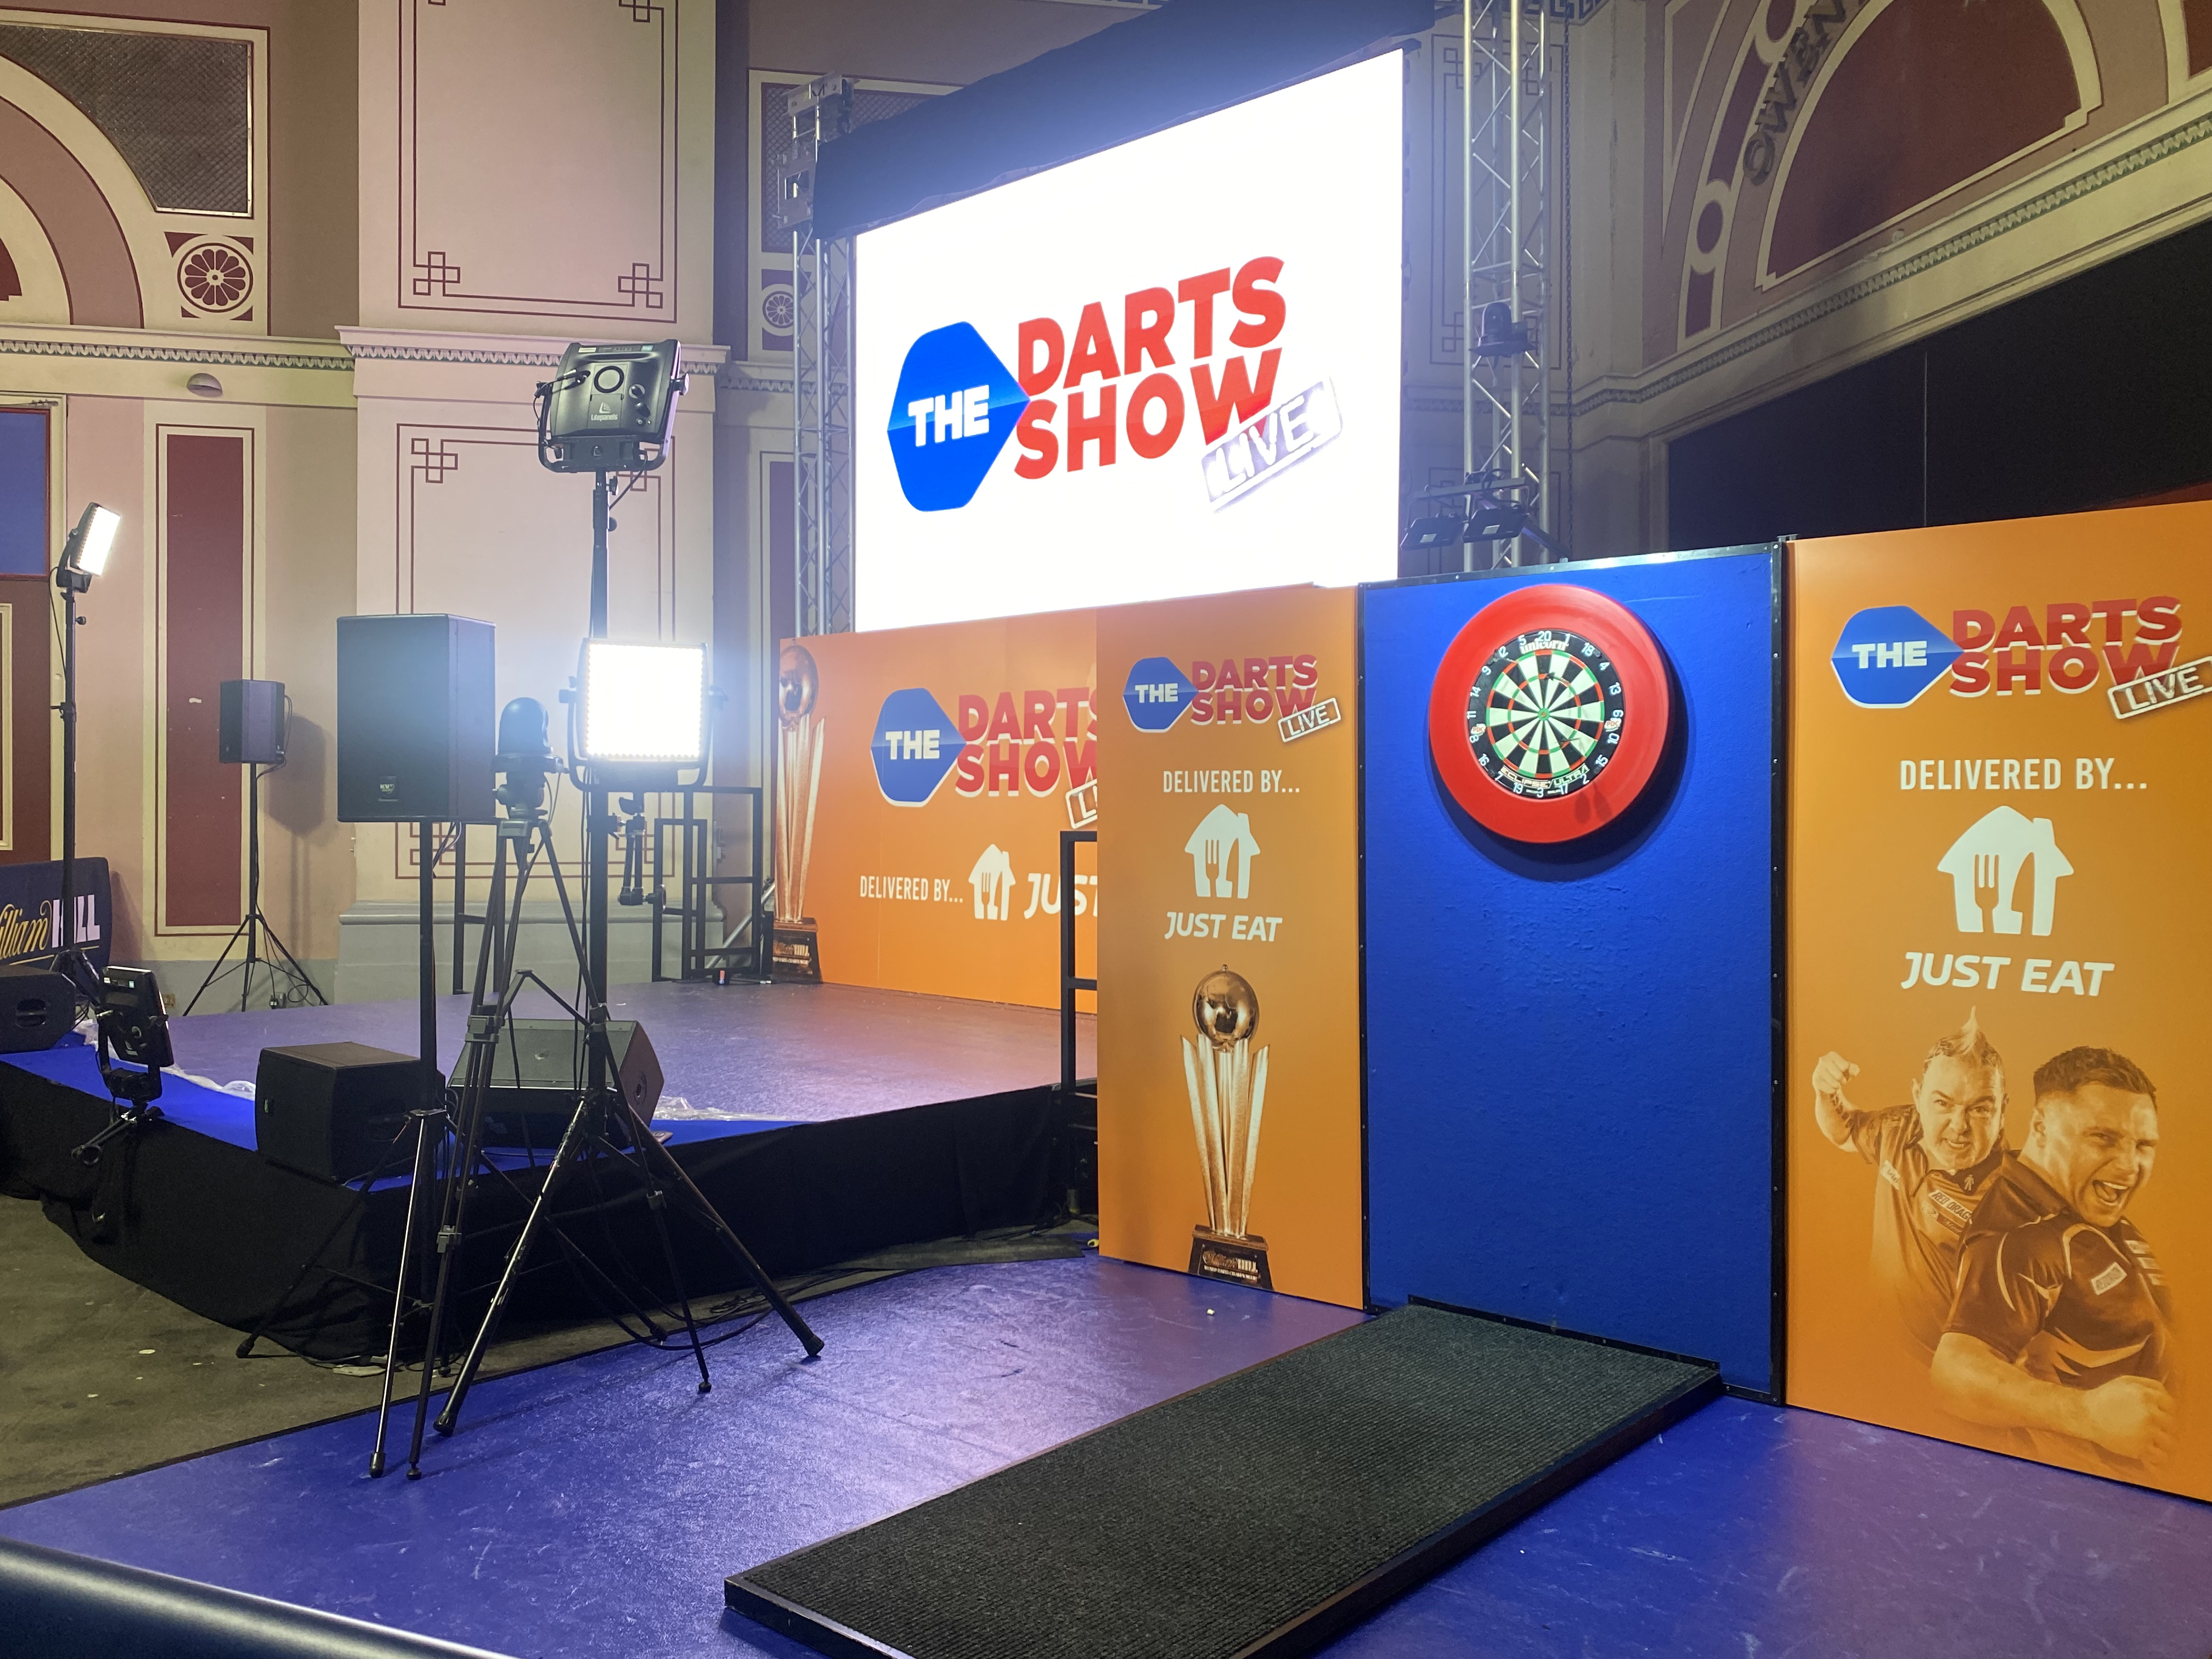 The Darts Show Live stage